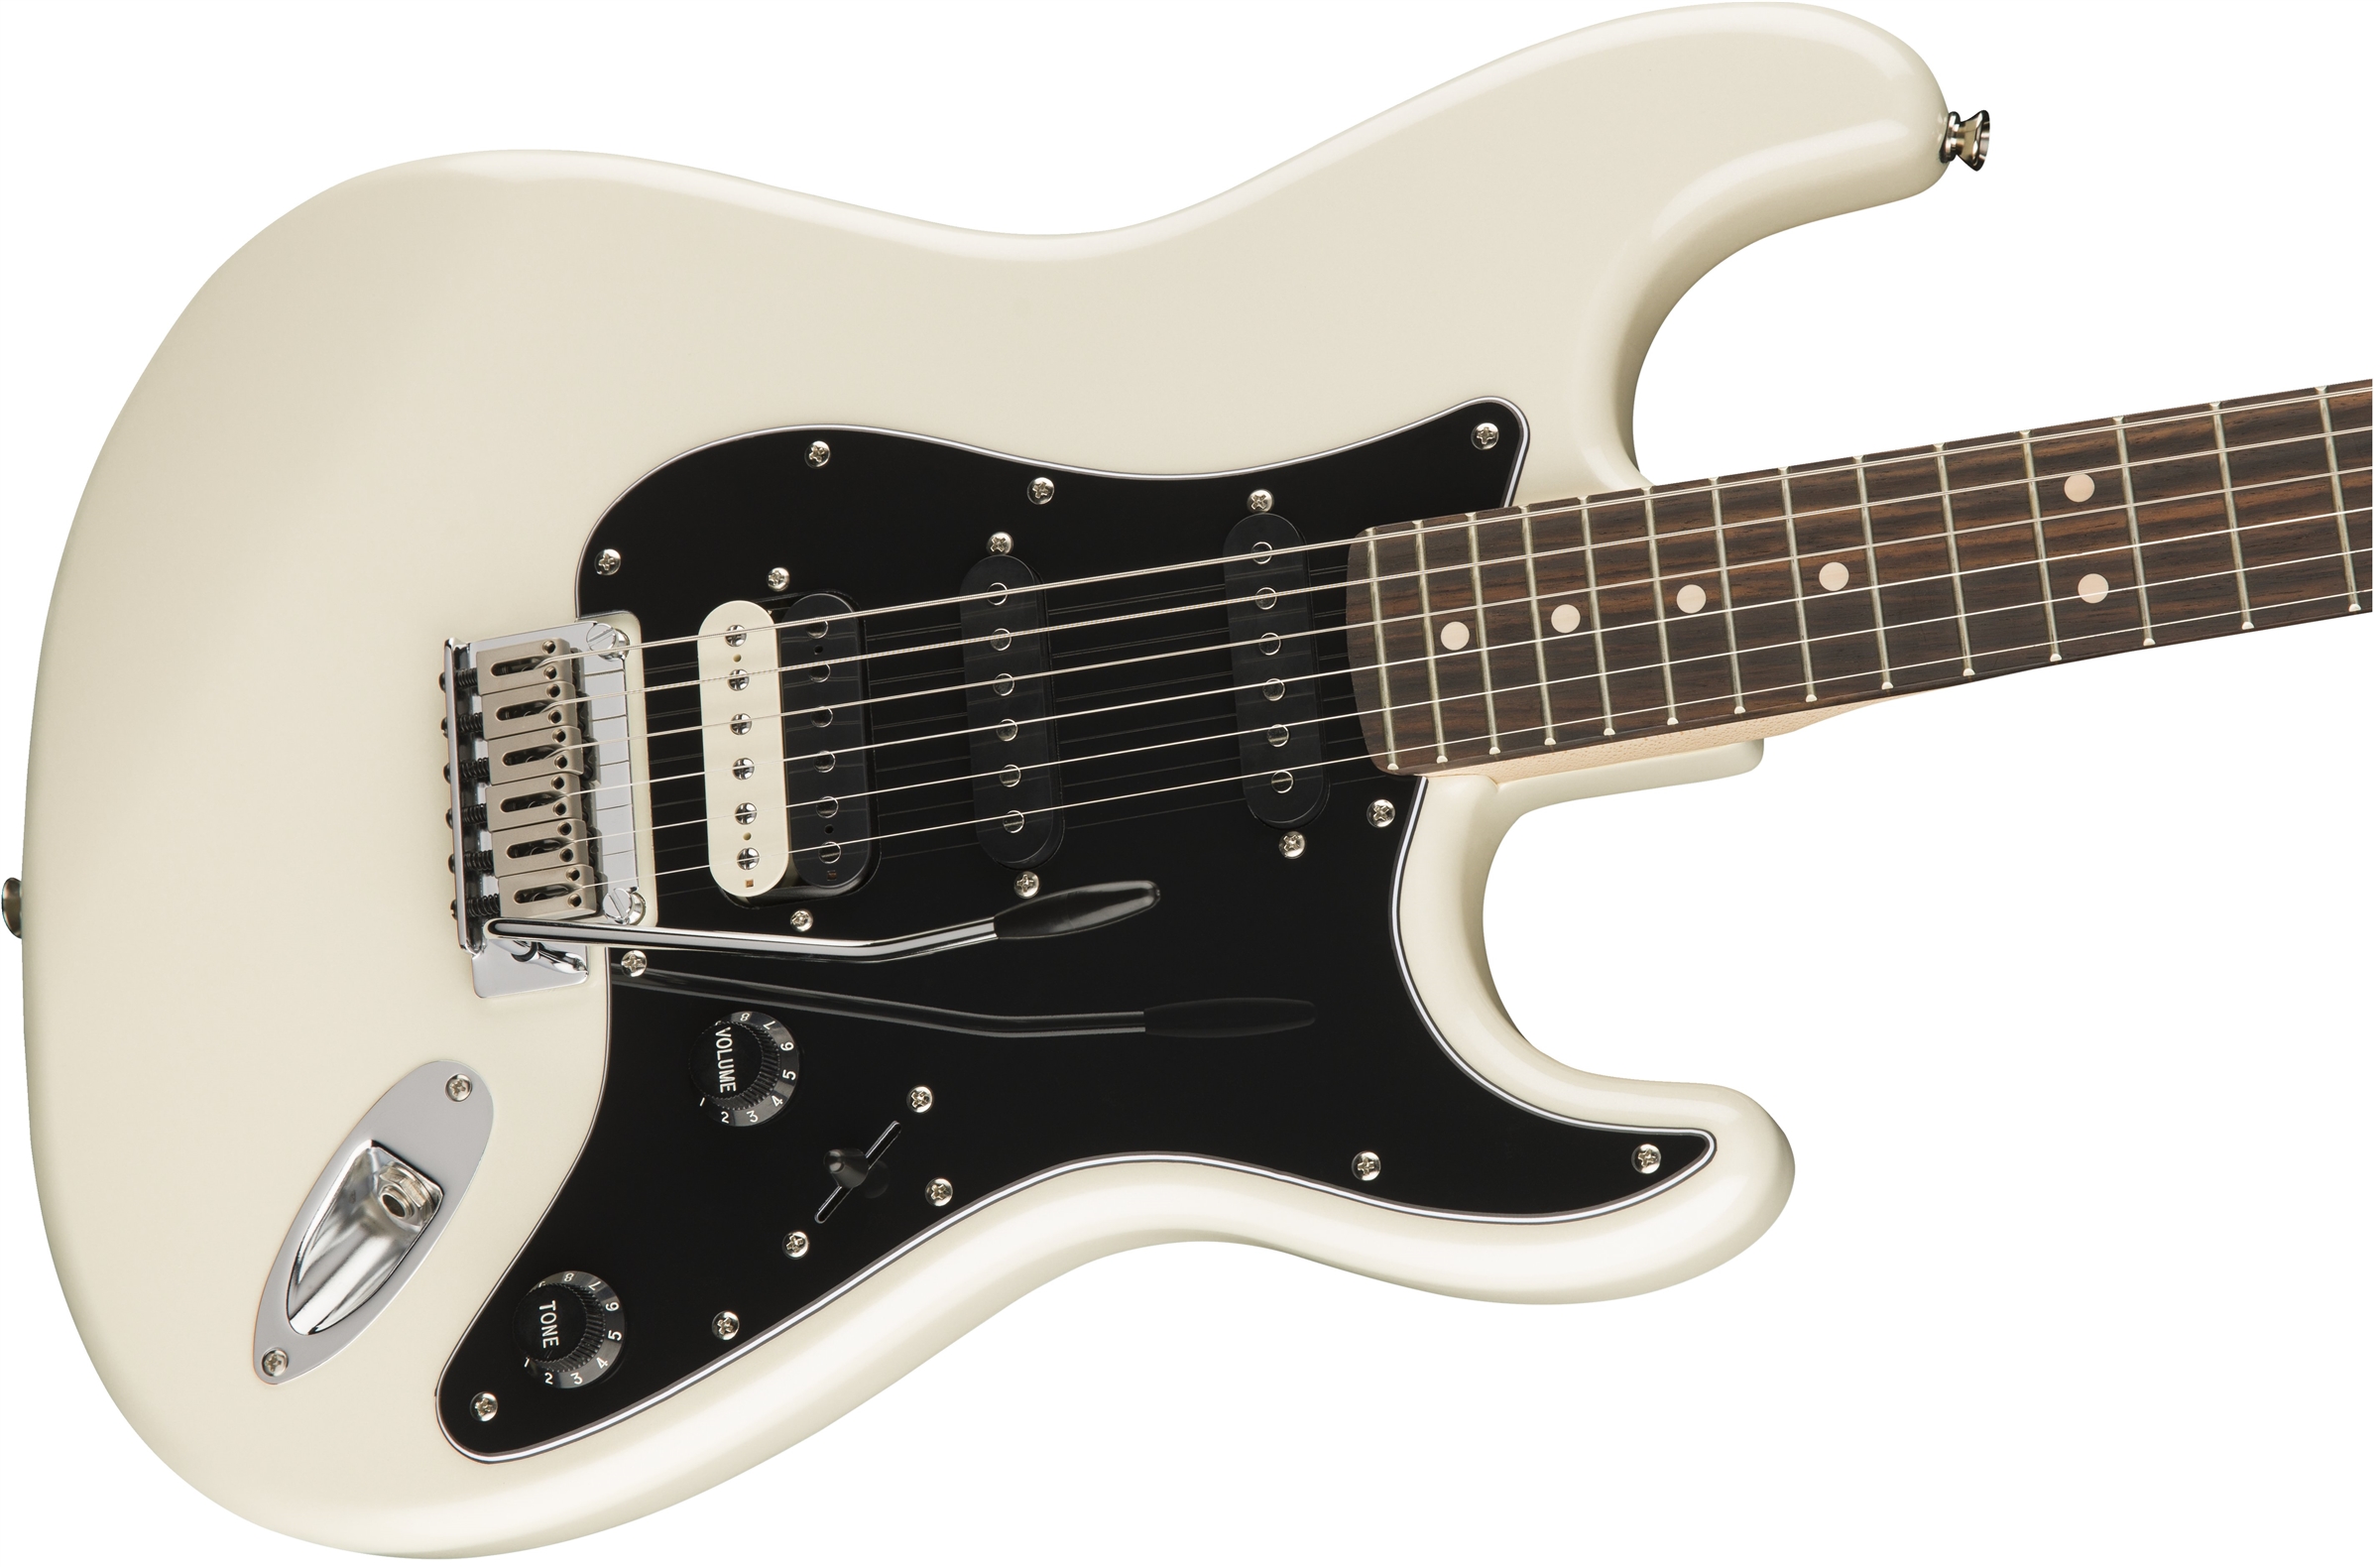 White stratocaster. Электрогитара Squier Contemporary Stratocaster HSS. Гитара Fender Squier. Электрогитара Fender Squier Stratocaster. Электрогитара Squier by Fender HSS.